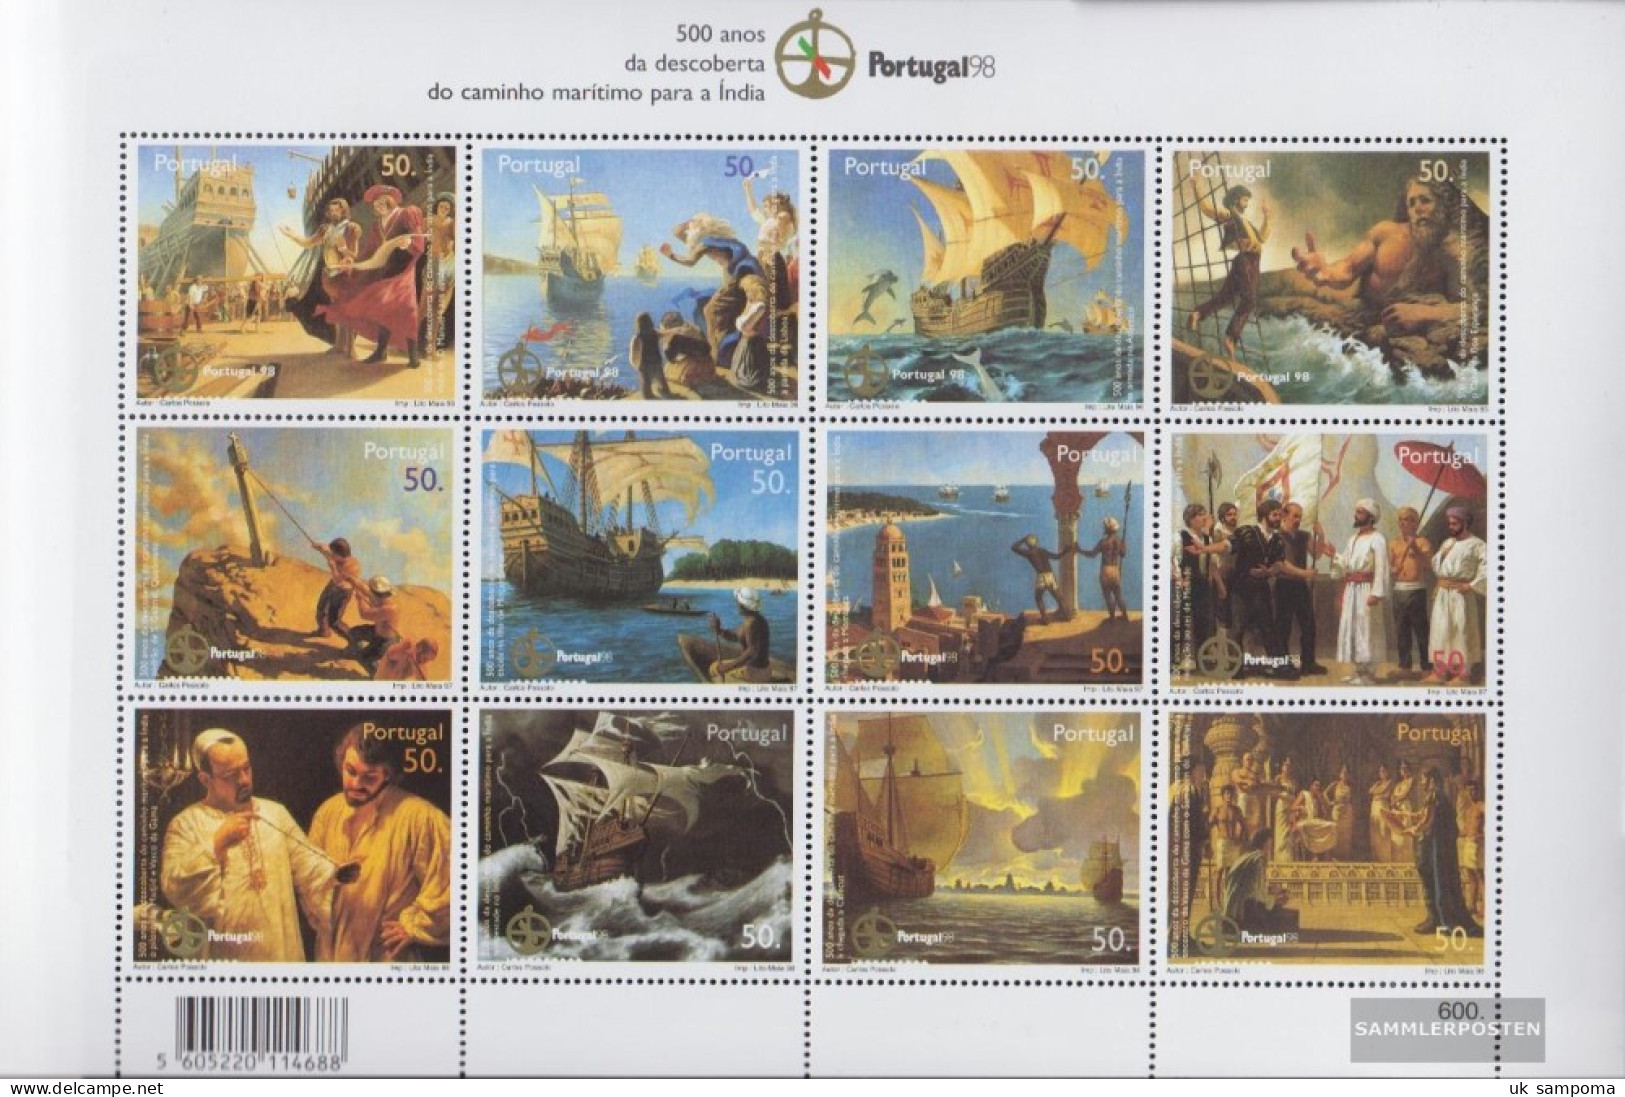 Portugal 2299,2303-2313 Zd-archery Unmounted Mint / Never Hinged 1998 Stamp Exhibition - Ongebruikt